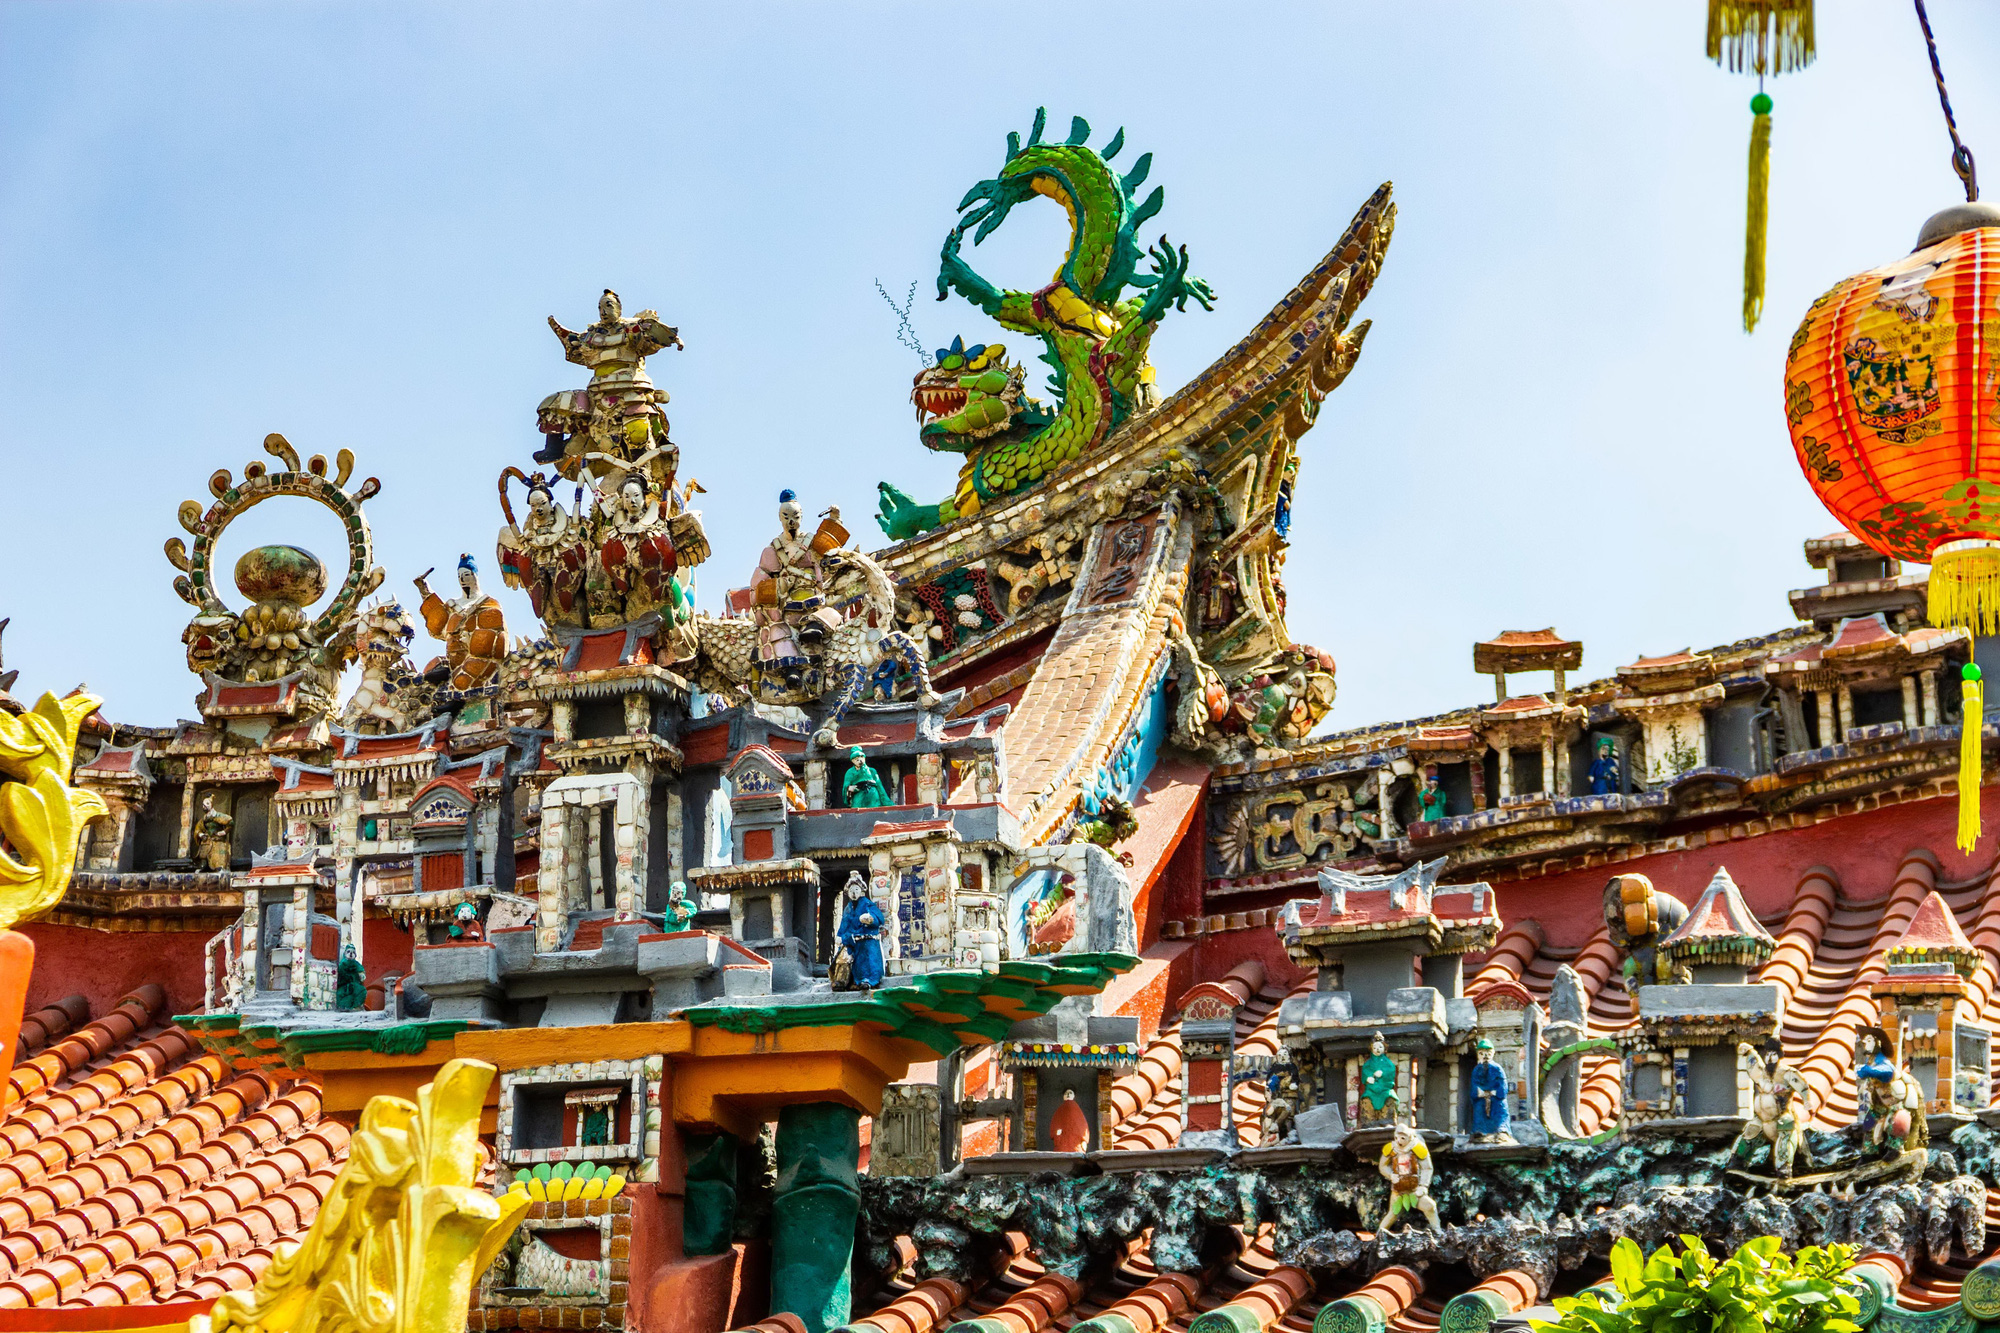 Details on the roof of the Quan Am Pagoda, a Chinese-style Buddhist pagoda located on Lao Tu Street in District 5, Ho Chi Minh City, Vietnam, are seen in the photo. Photo: Tran Hong Ngoc / Tuoi Tre